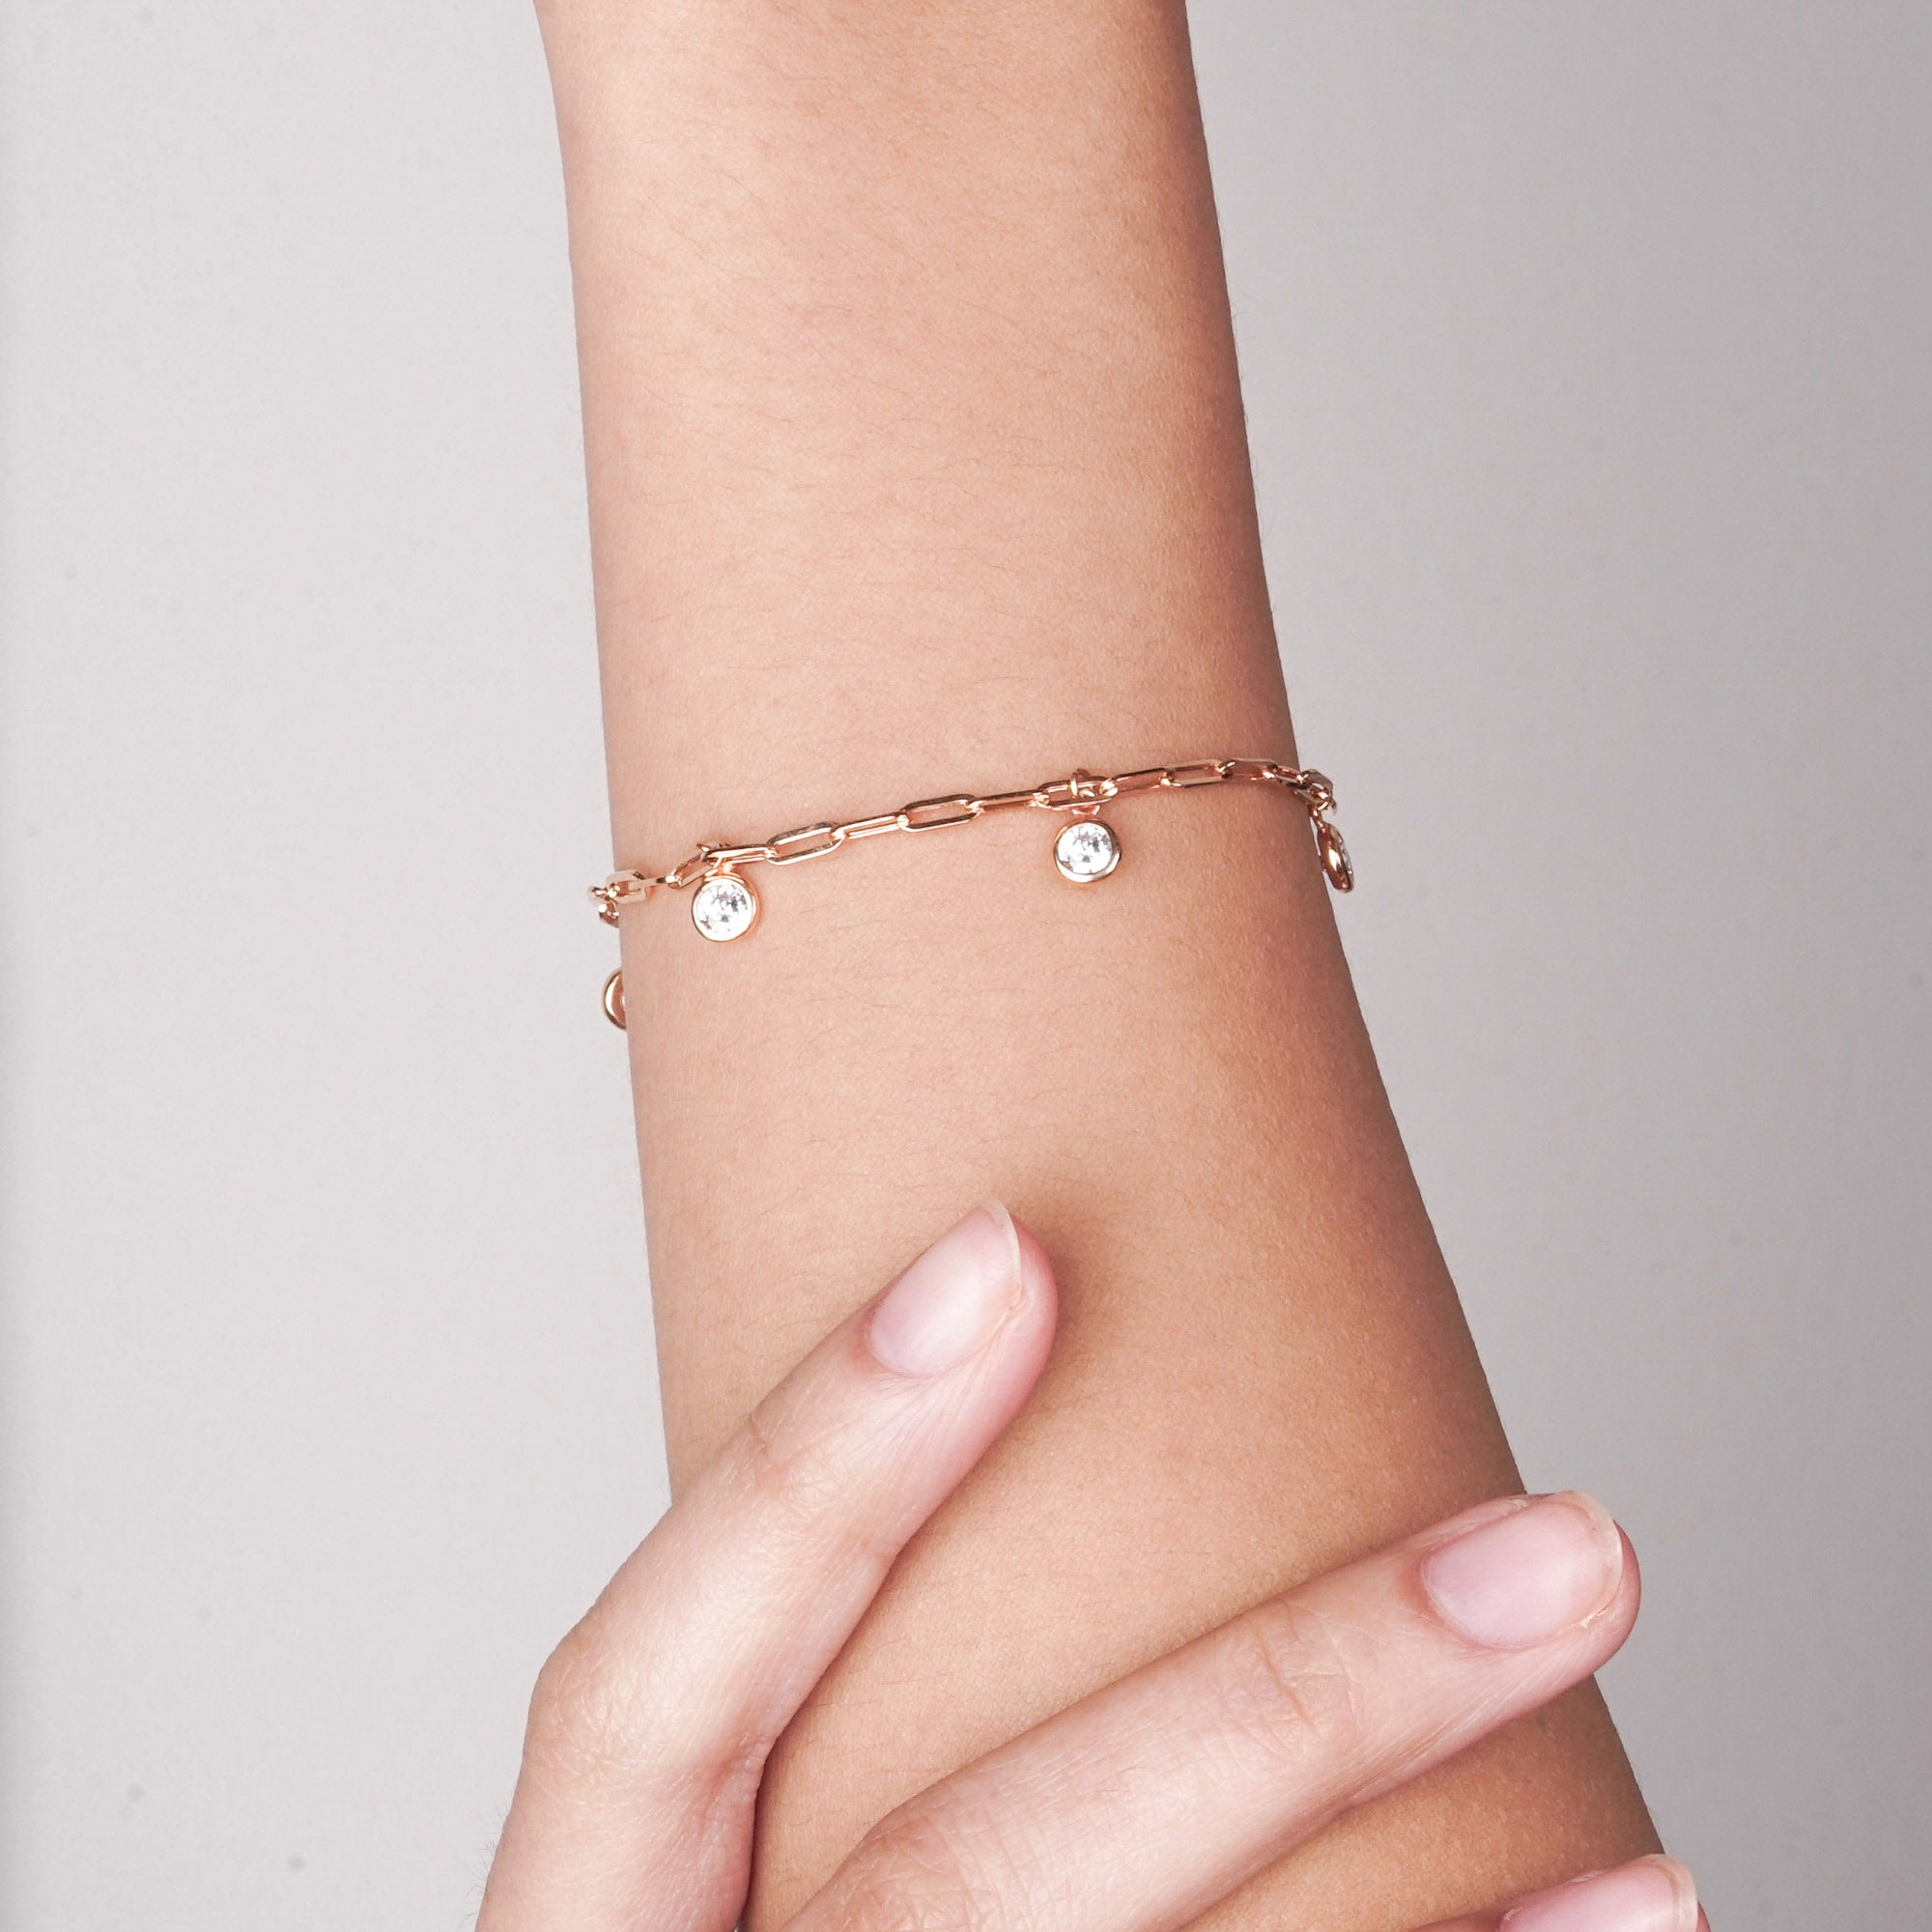 Chara Gold Bracelet - Modest Collection - Juene Jewelry